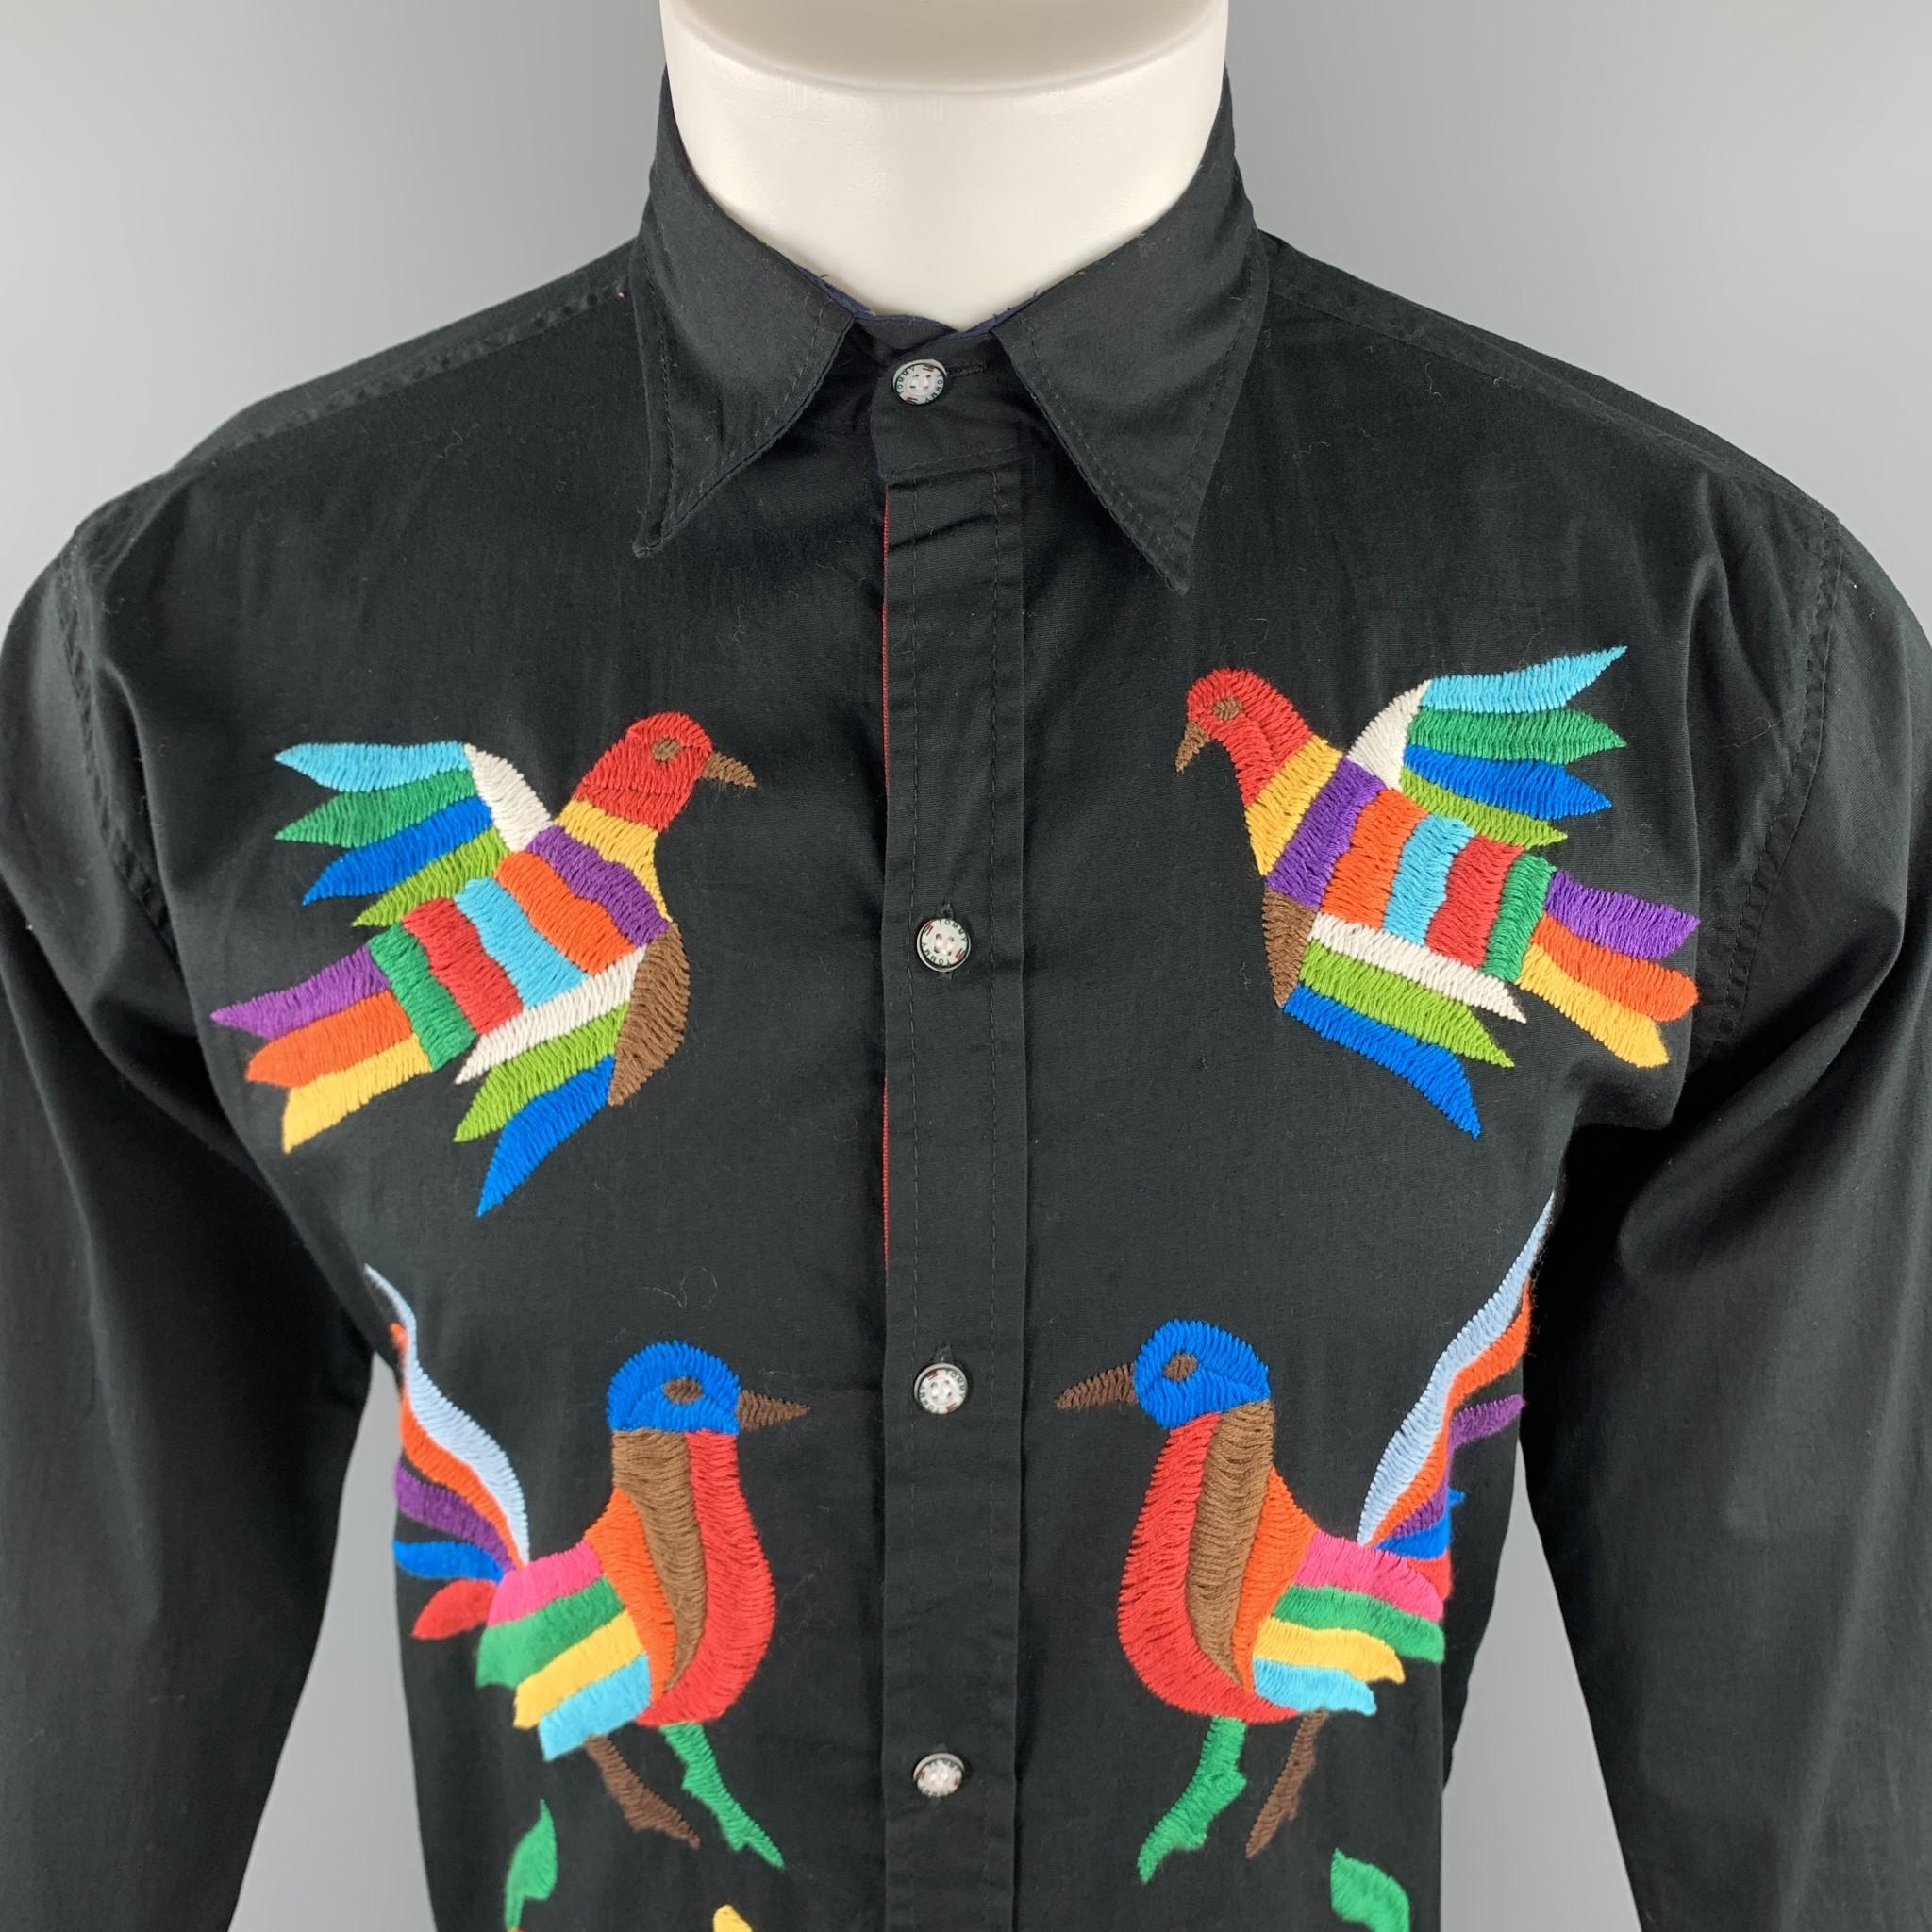 CUSTOM MADE long sleeve shirt comes in a solid black cotton material, featuring multi color custom embroideries at front, a classic collar, button up. With Tommy Hilfiger buttons and striped trim. 

Excellent Pre-Owned Condition.
Marked:no